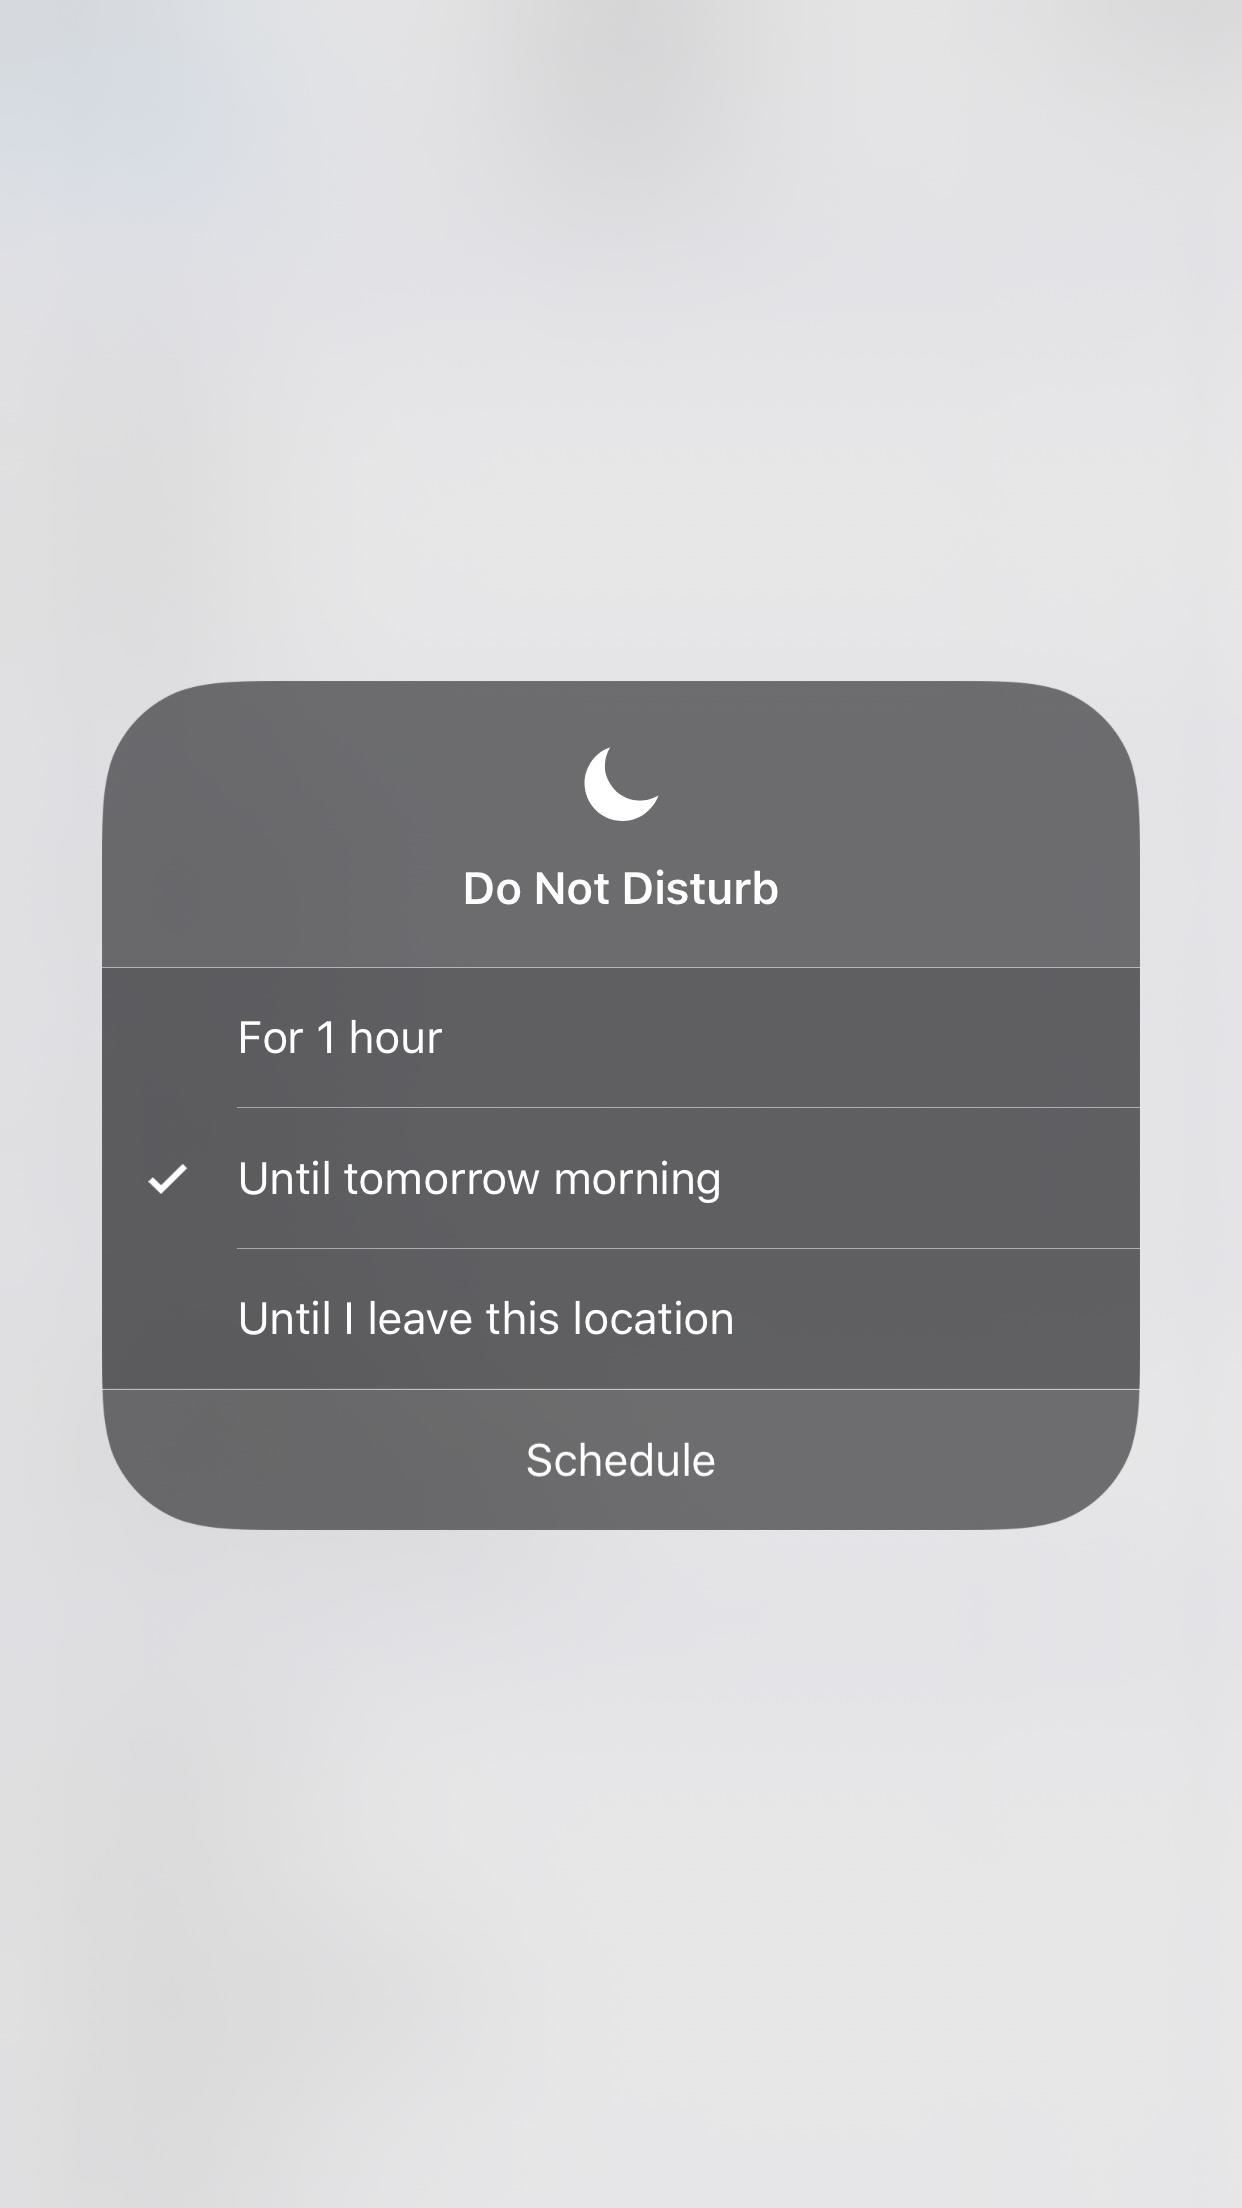 Quickly Turn on 'Do Not Disturb' in iOS 12 Until the Evening or Morning